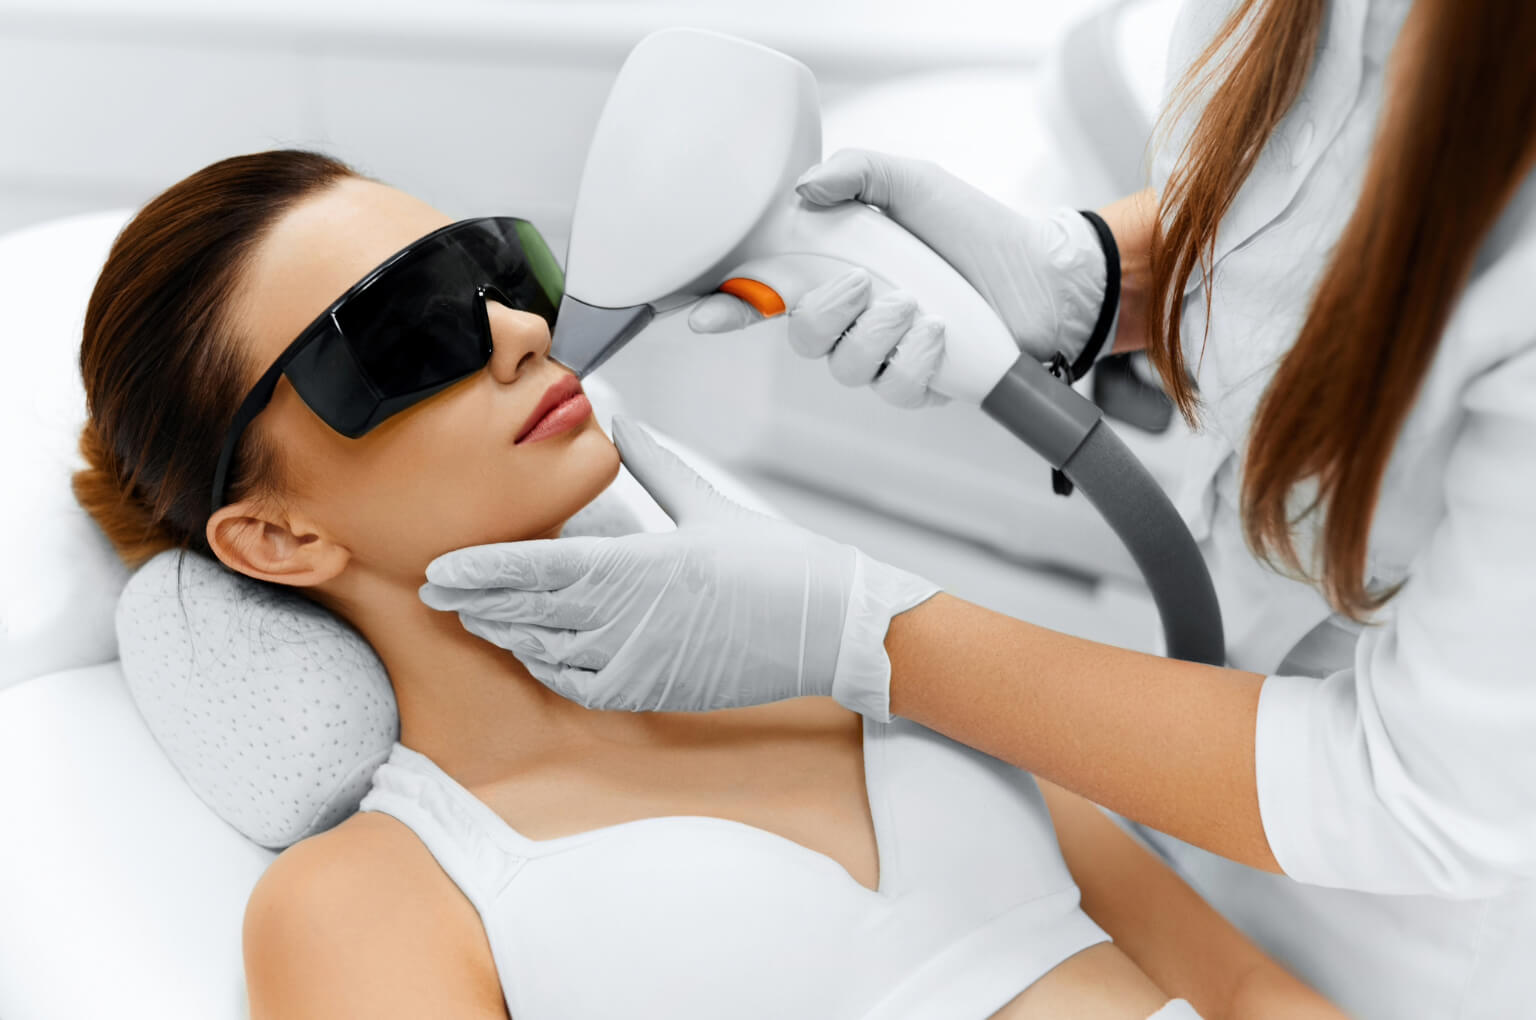 How do you sleep after Halo laser treatment?